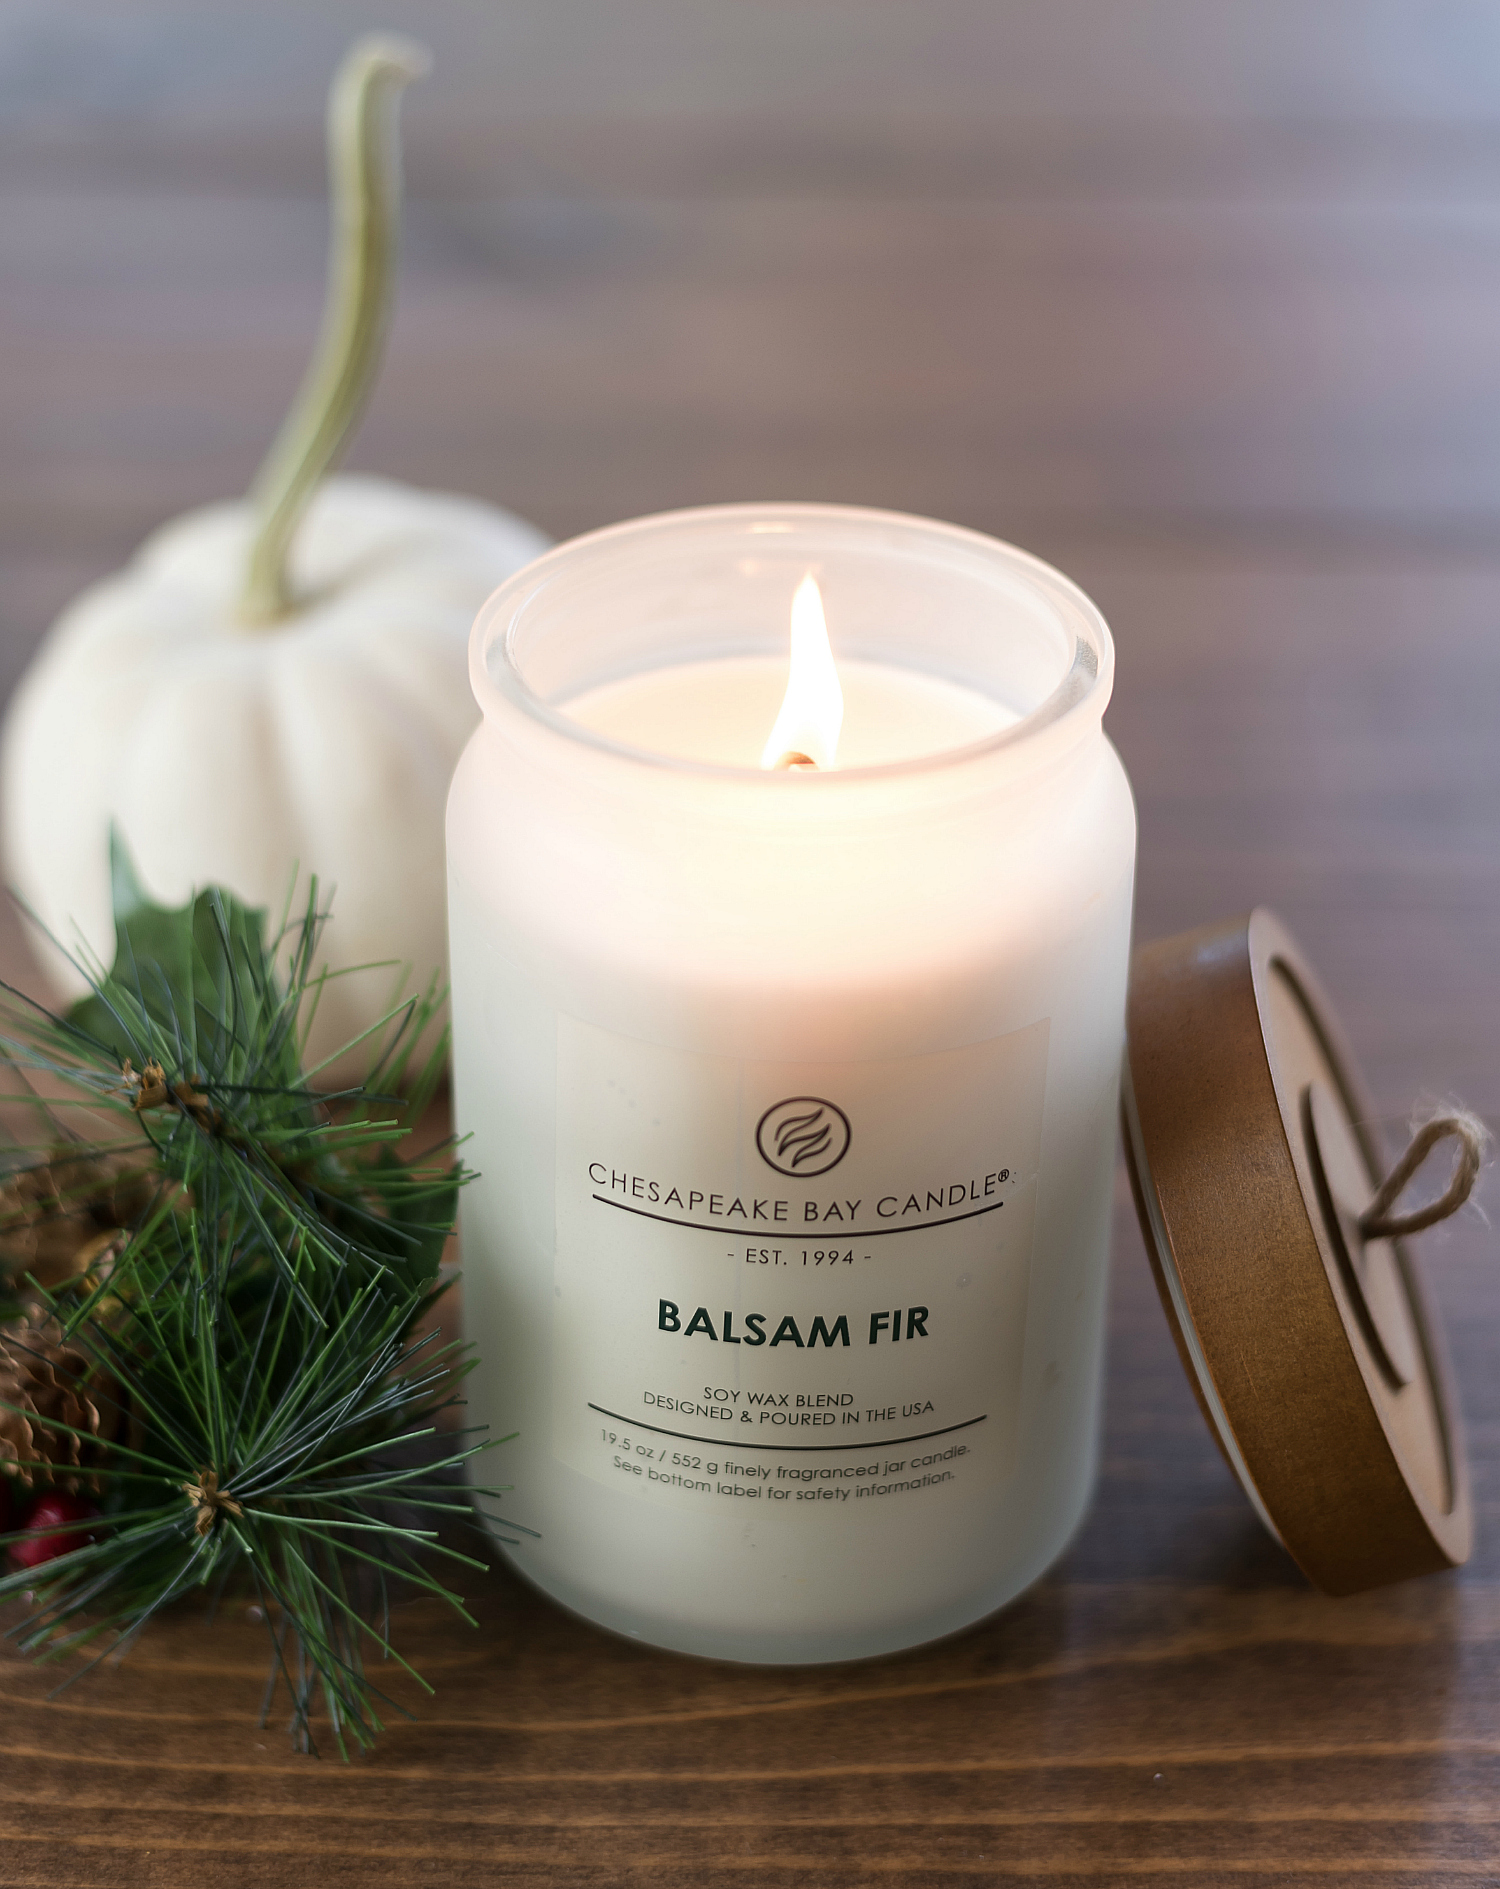 Fall Candles from Chesapeake Bay Candle Heritage Collection Fall 2017